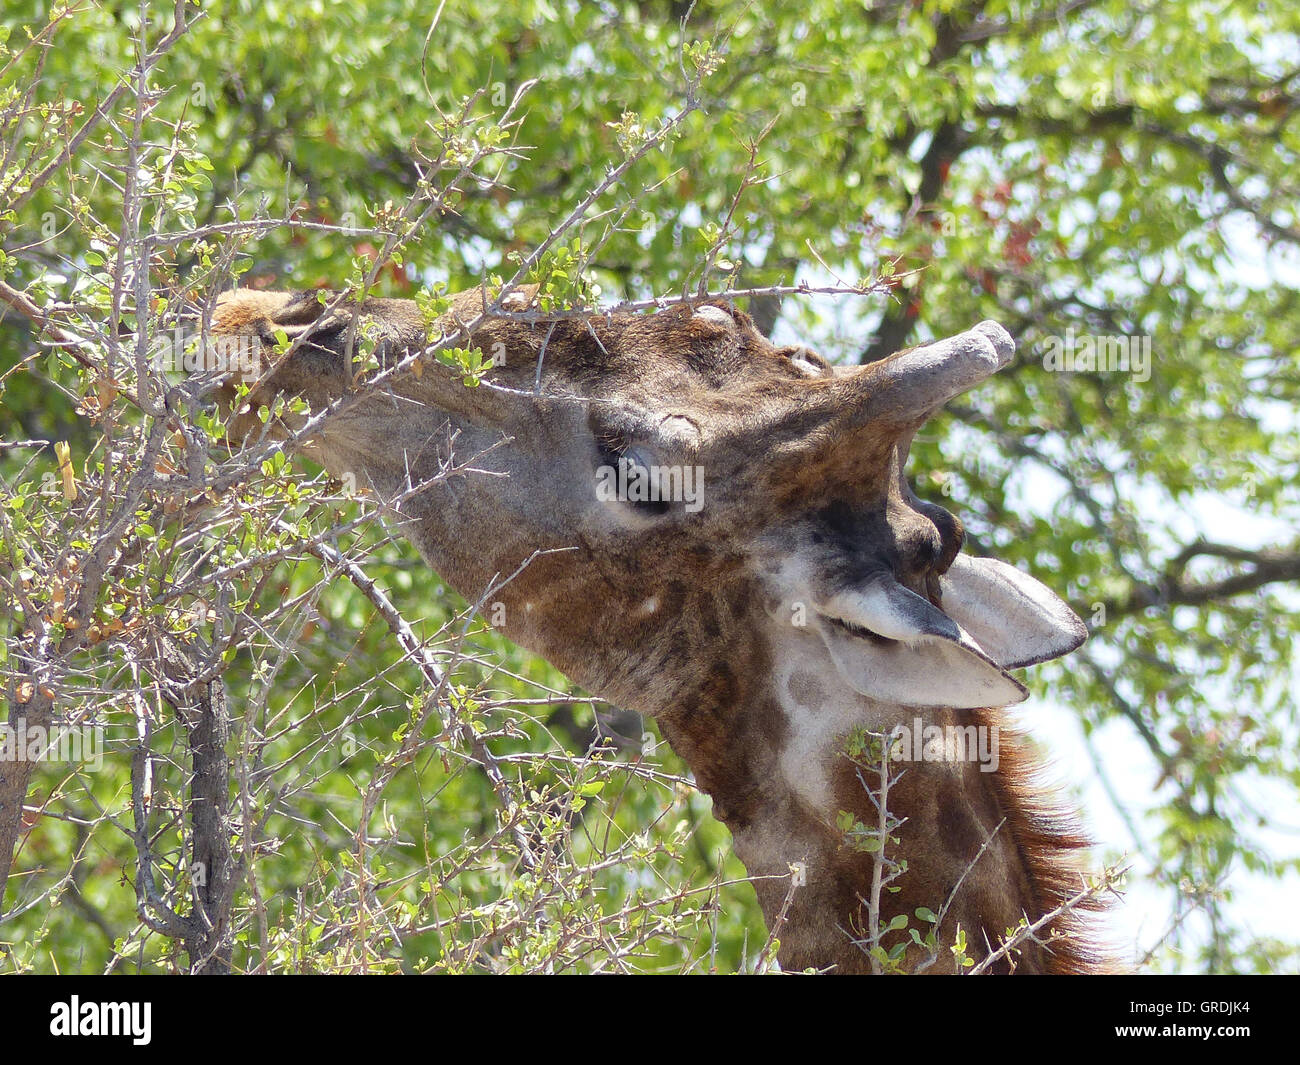 Giraffe Eating From Thorny Plant, Portrait Stock Photo